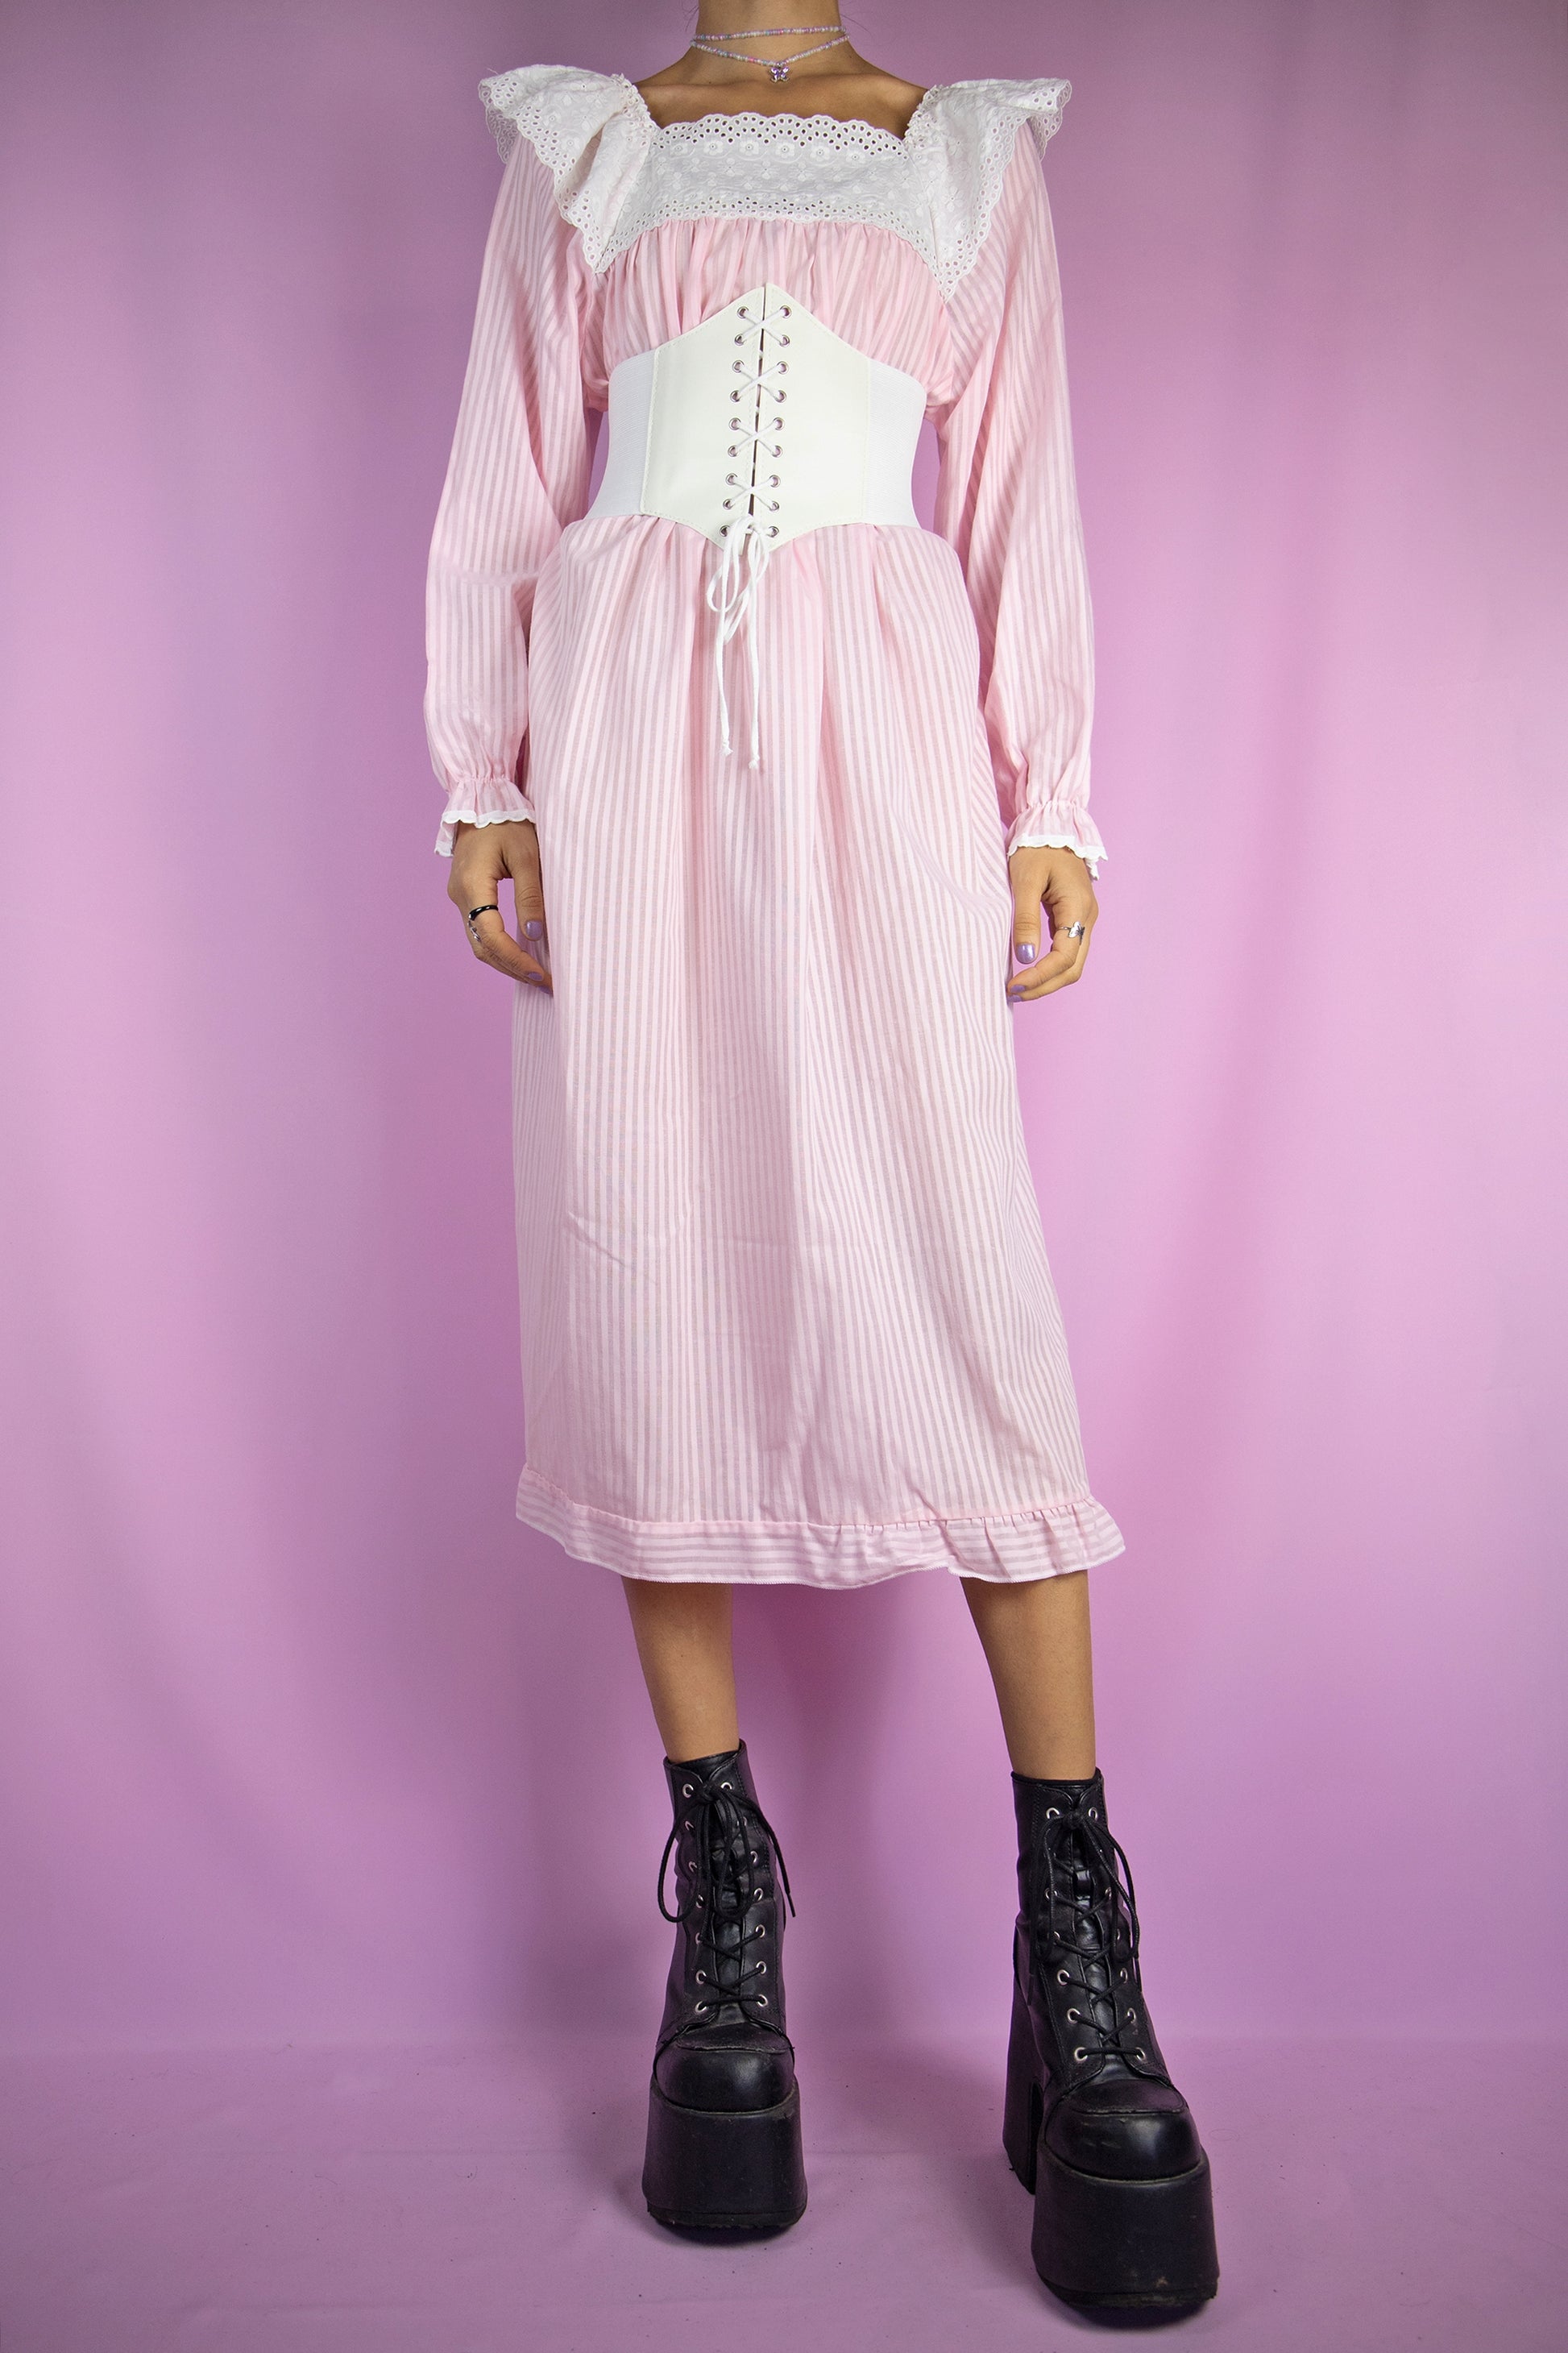 The Vintage 80s Pink Striped Nightgown Dress is a light pastel pink striped midi dress with long sleeves, a white lace collar and a ruffle hem. Gorgeous romantic cottage prairie inspired sleepwear 1980s night dress. The white corset shown in the pictures is not included.